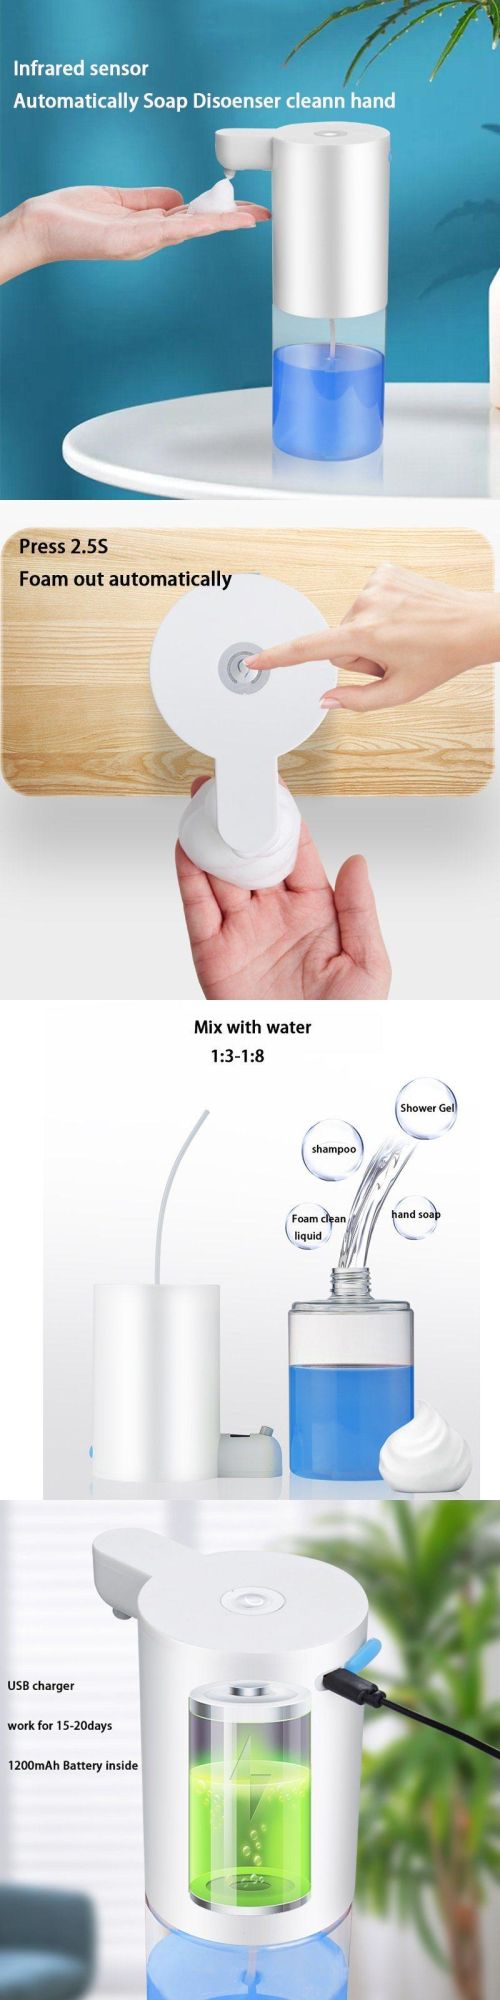 USB Charge Liquid Water Soluble Capsules Smart Hand Soap Dispenser